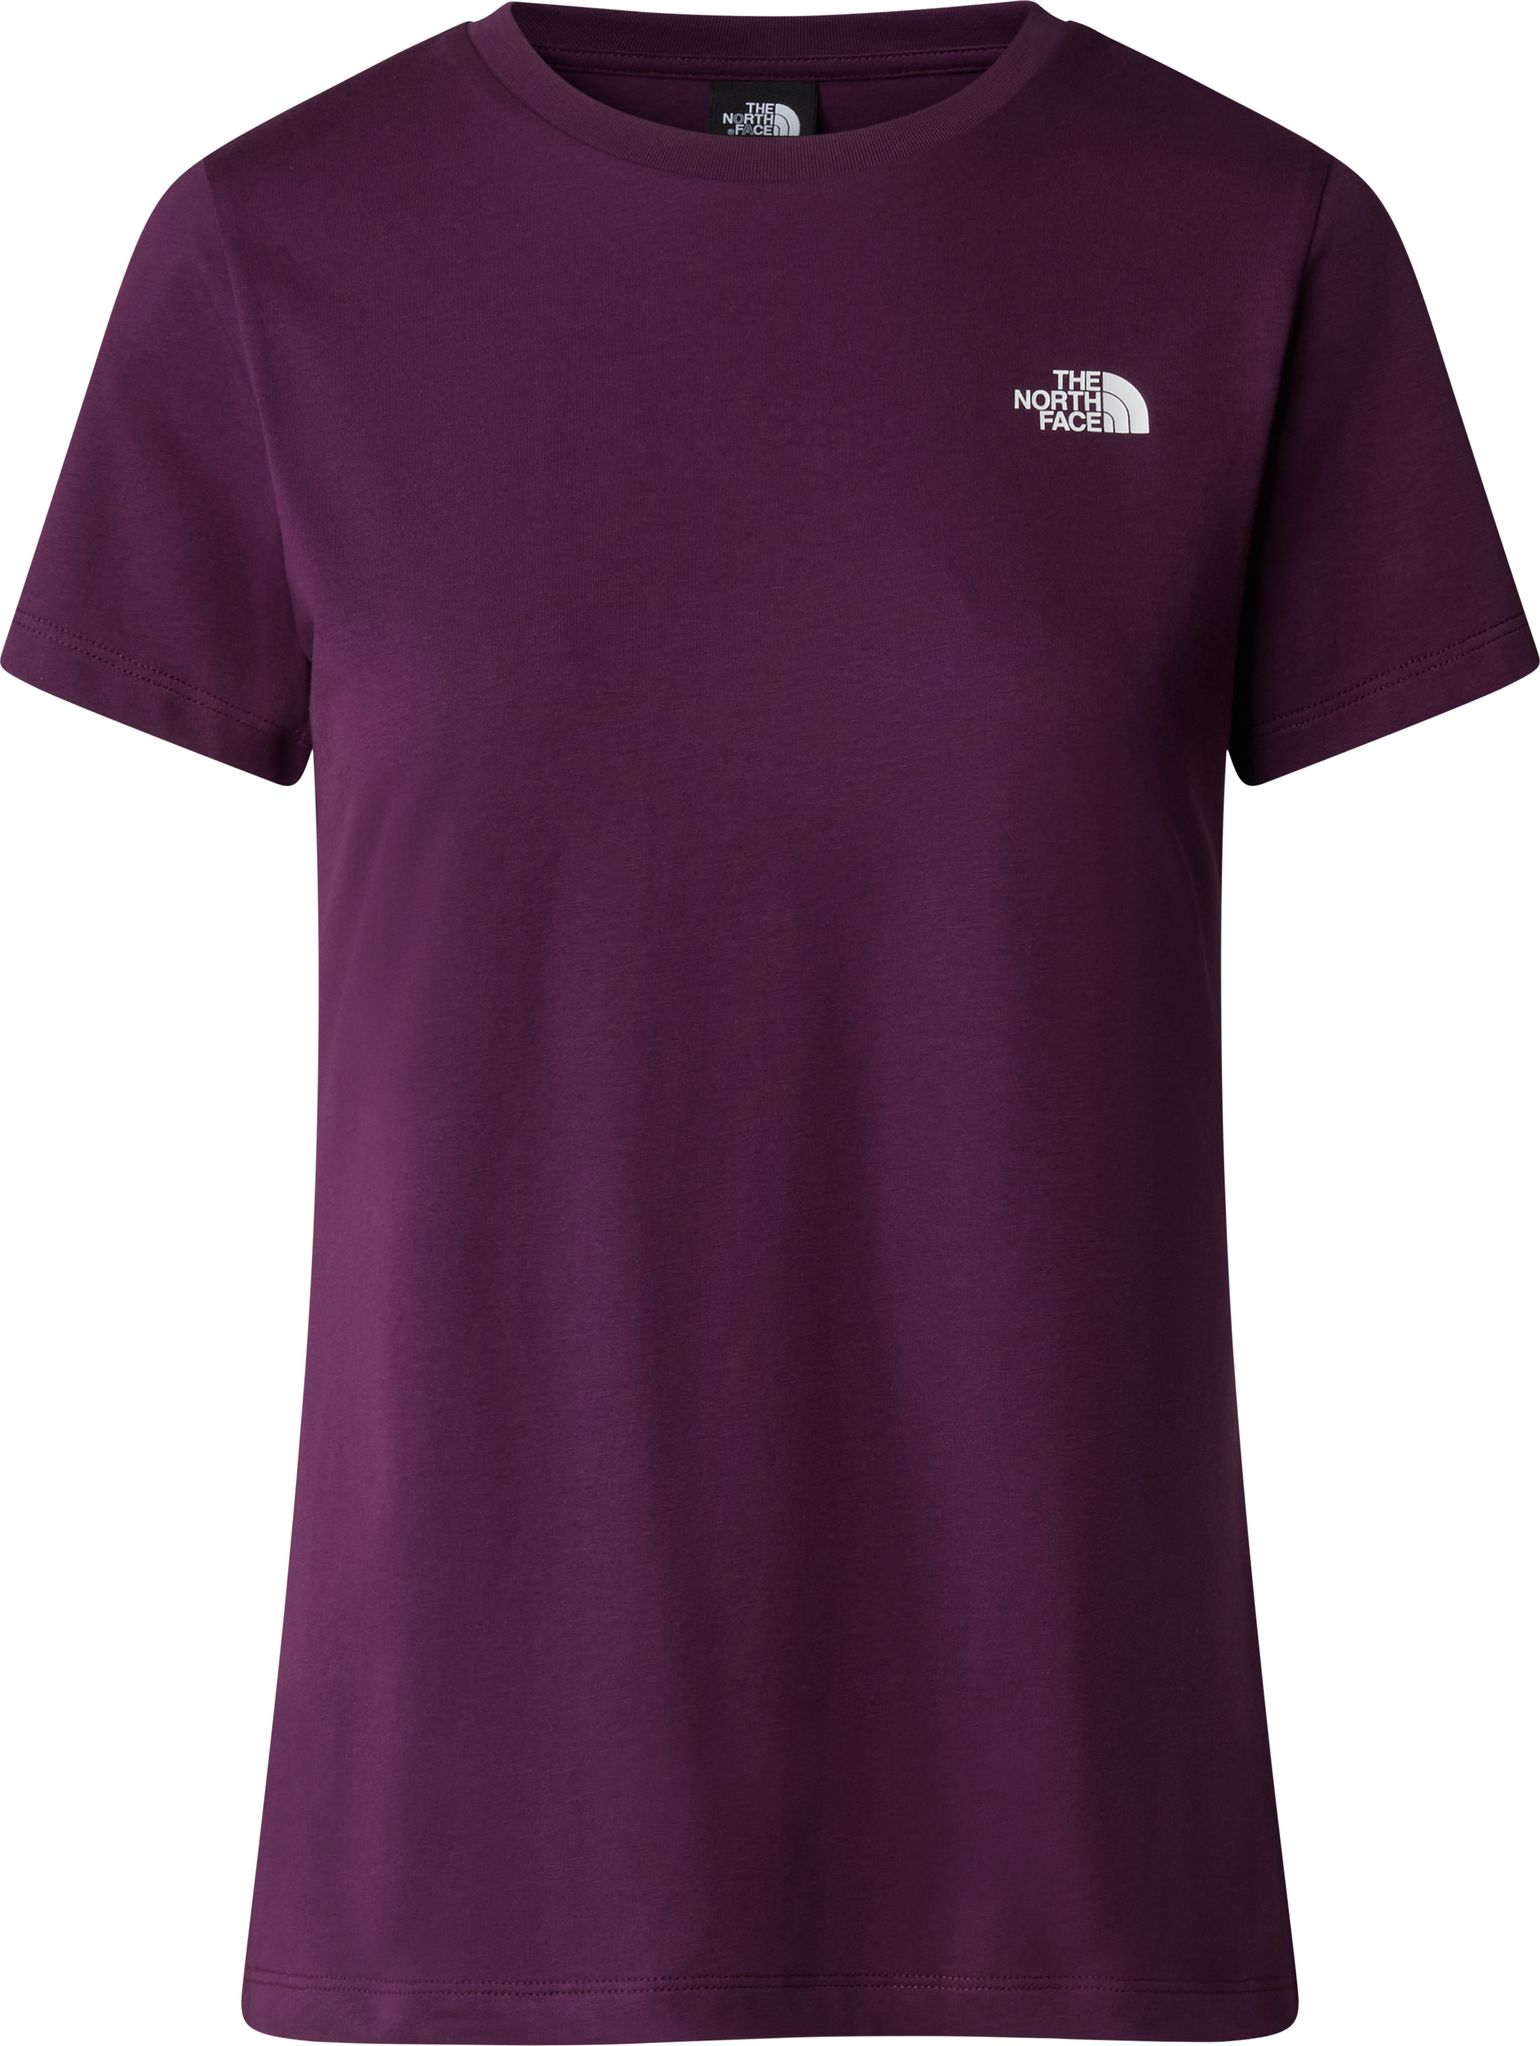 The North Face W S/S Simple Dome Tee Black Currant Purple